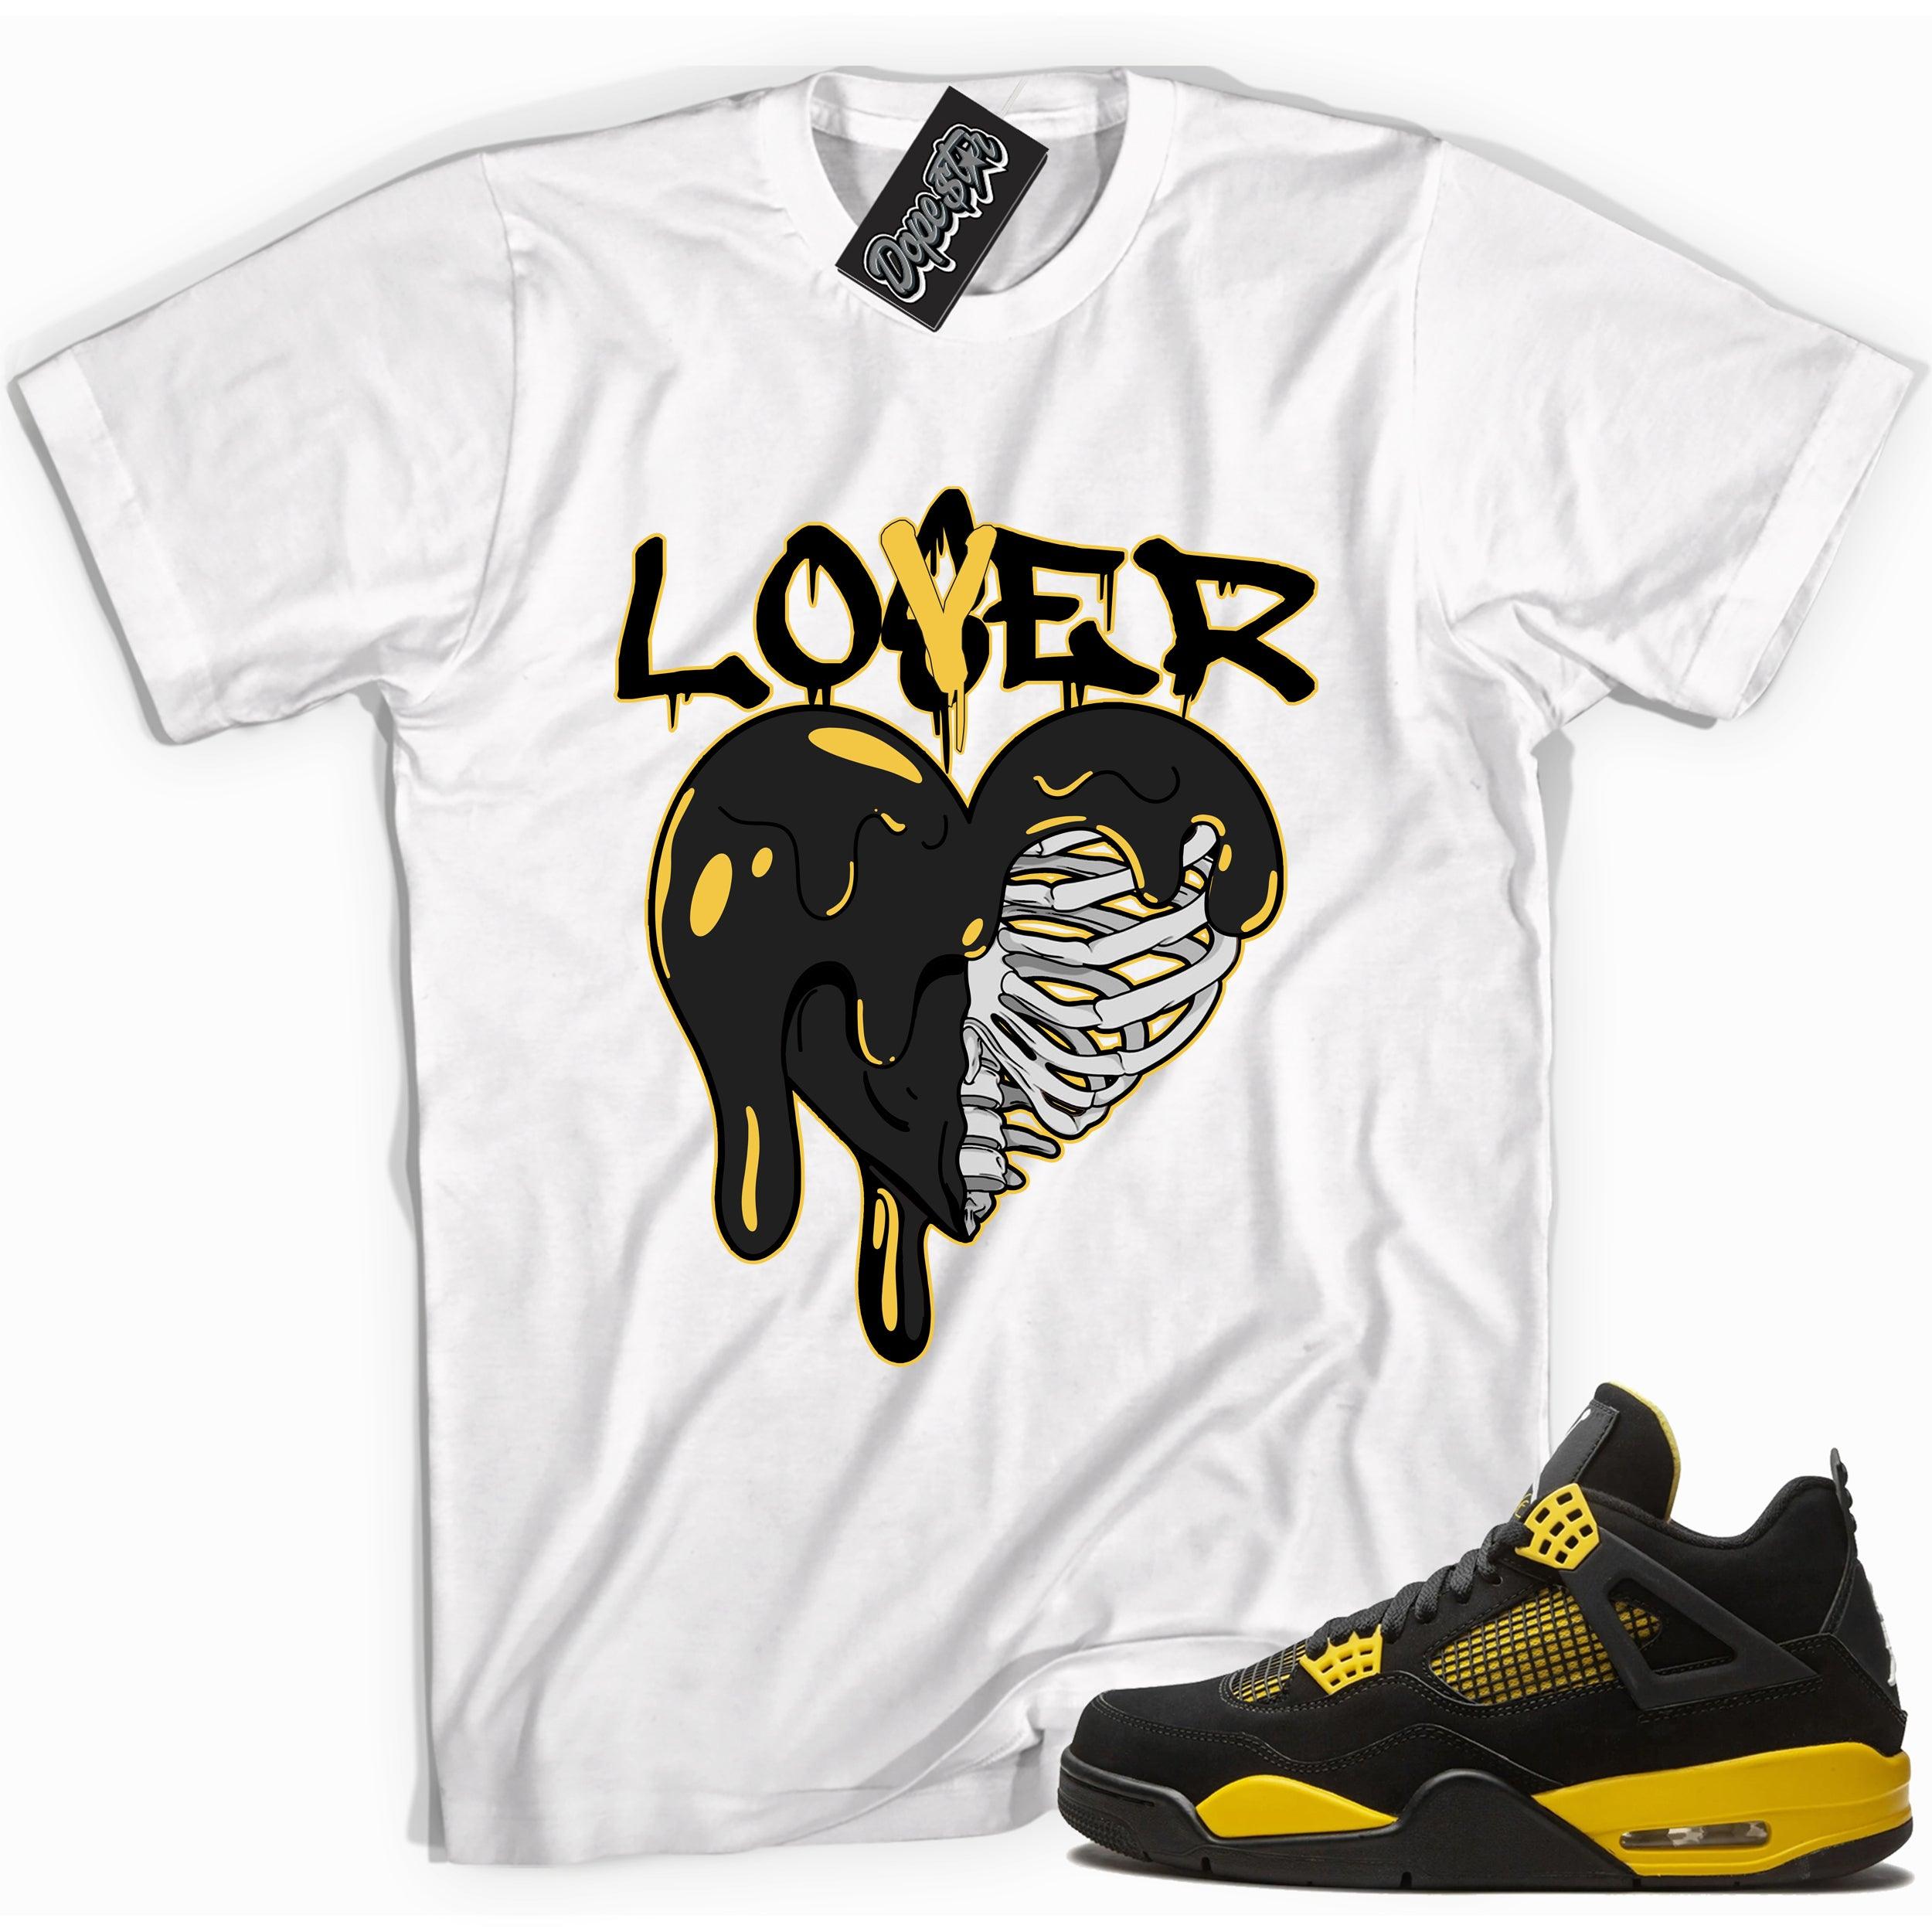 Cool white graphic tee with 'lover loser heart' print, that perfectly matches Air Jordan 4 Thunder sneakers